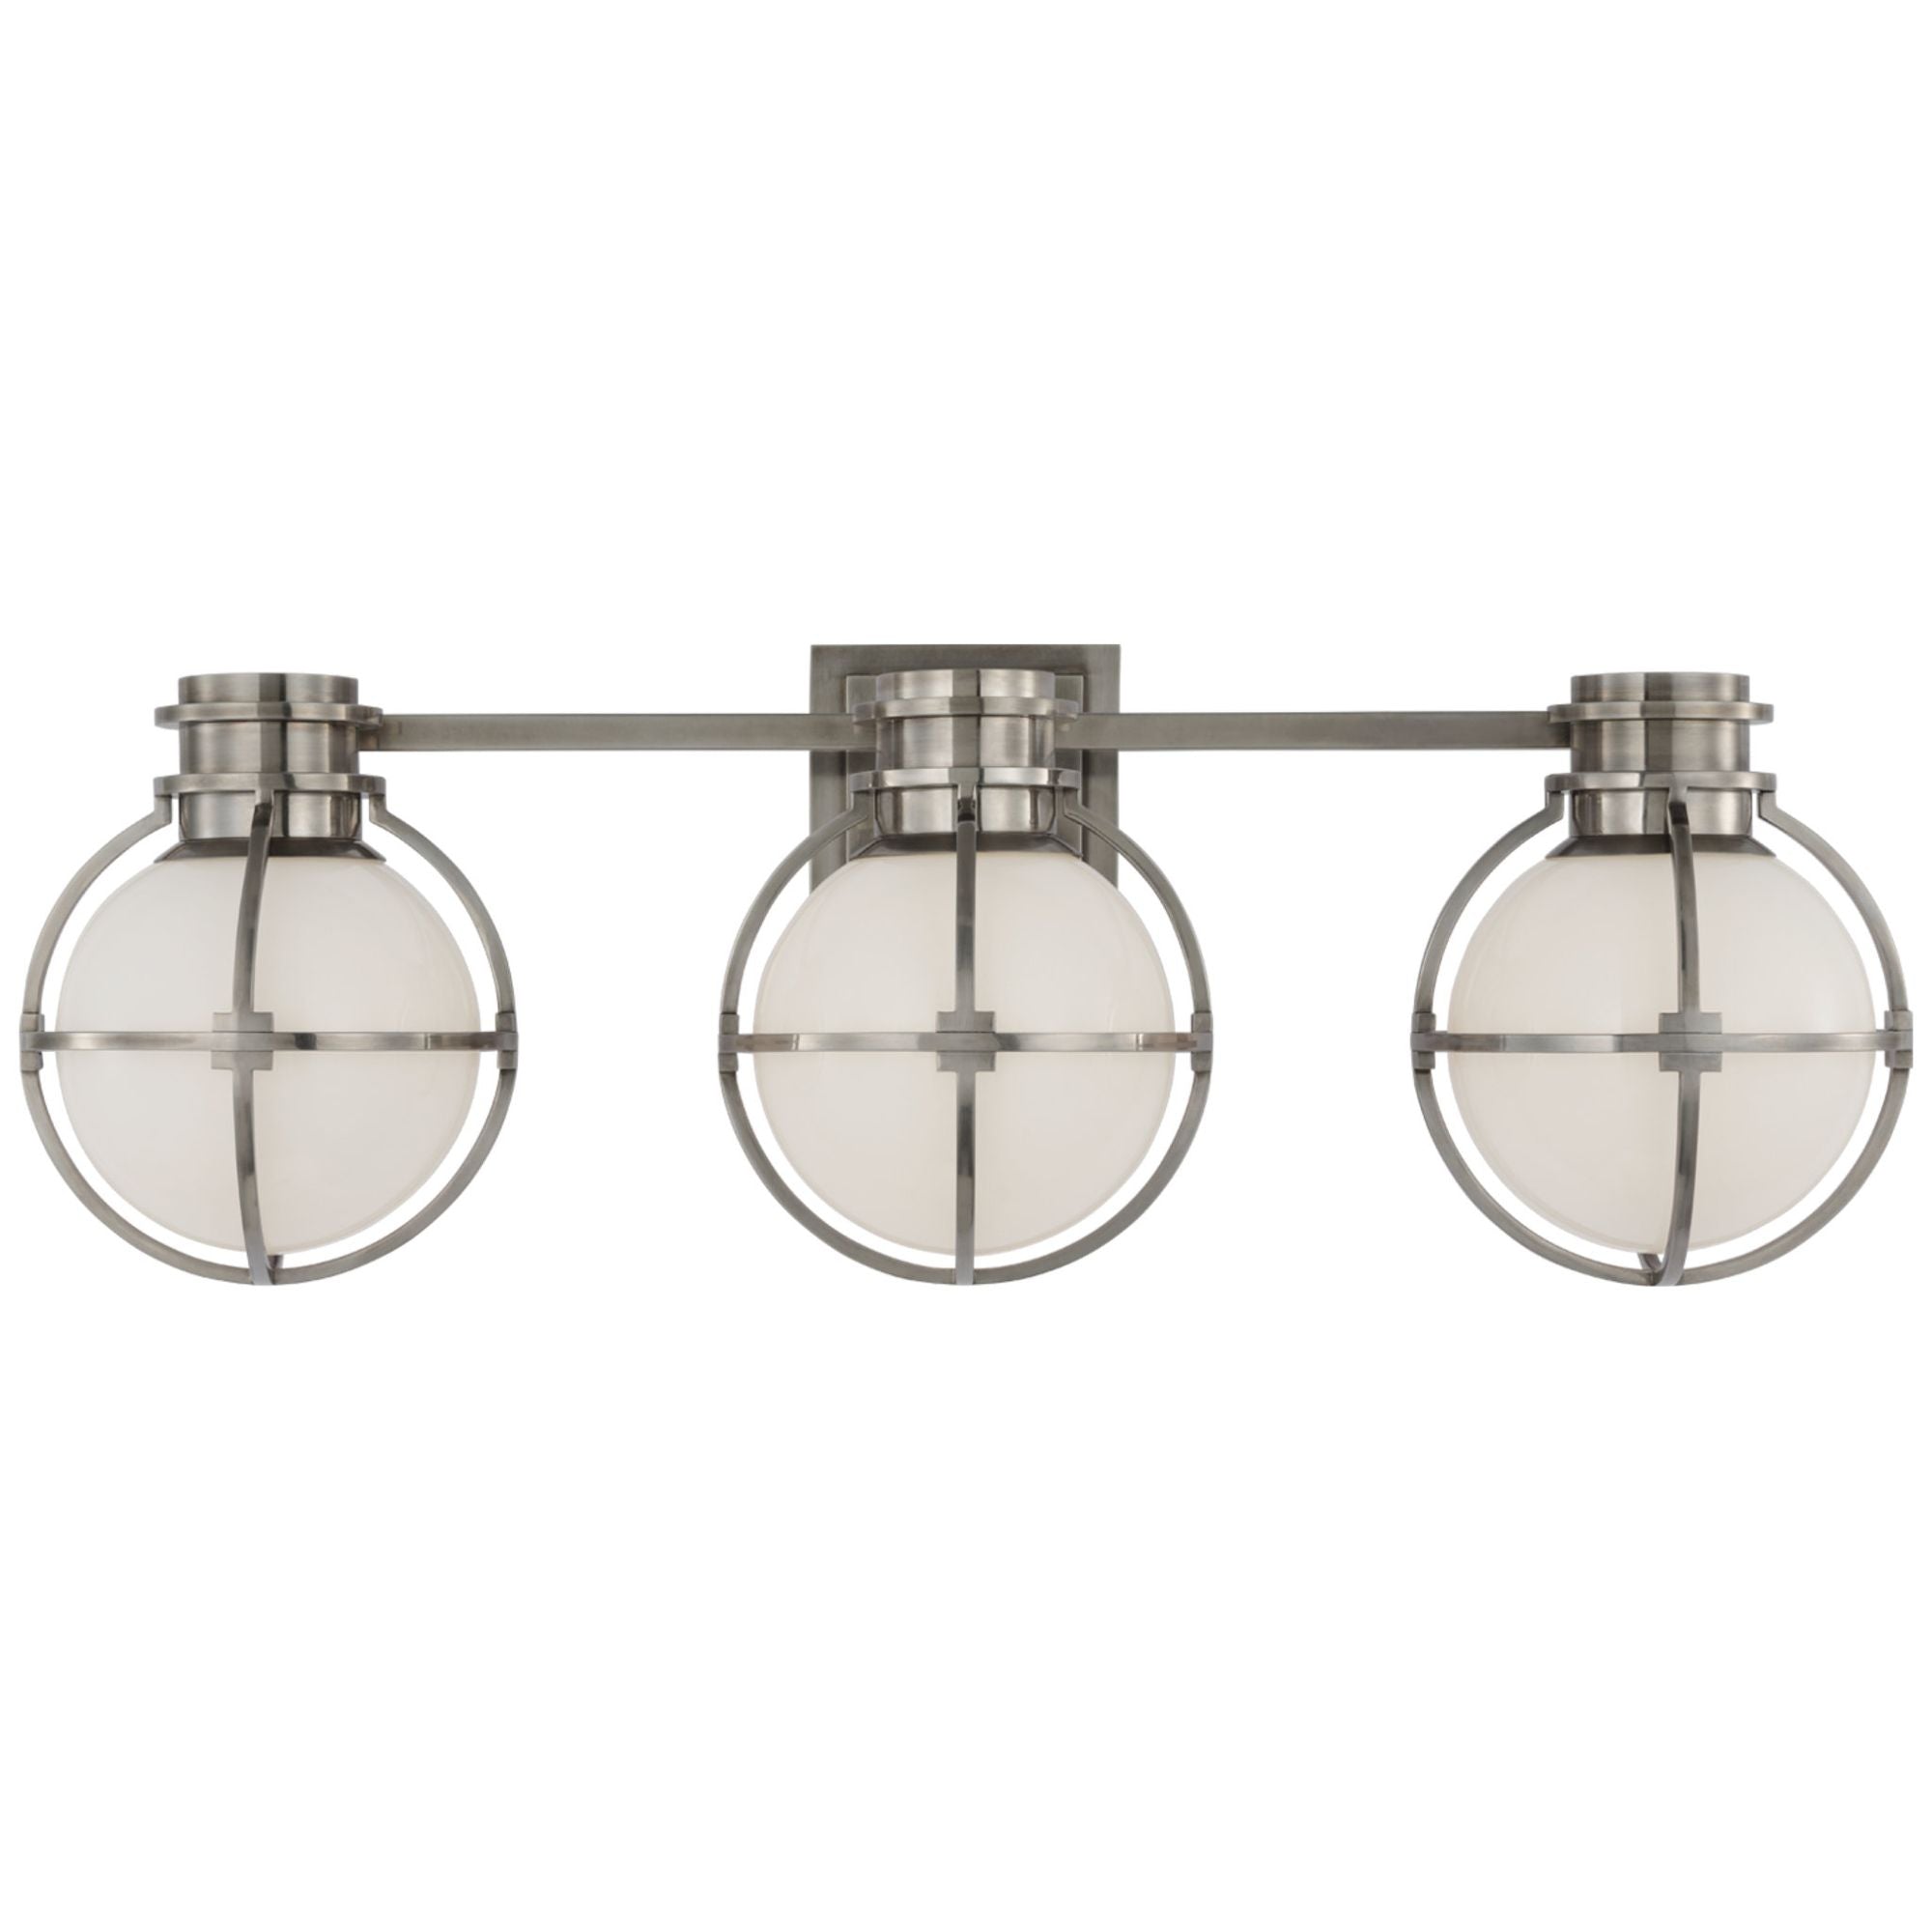 Chapman & Myers Gracie Triple Sconce in Antique Nickel with White Glass